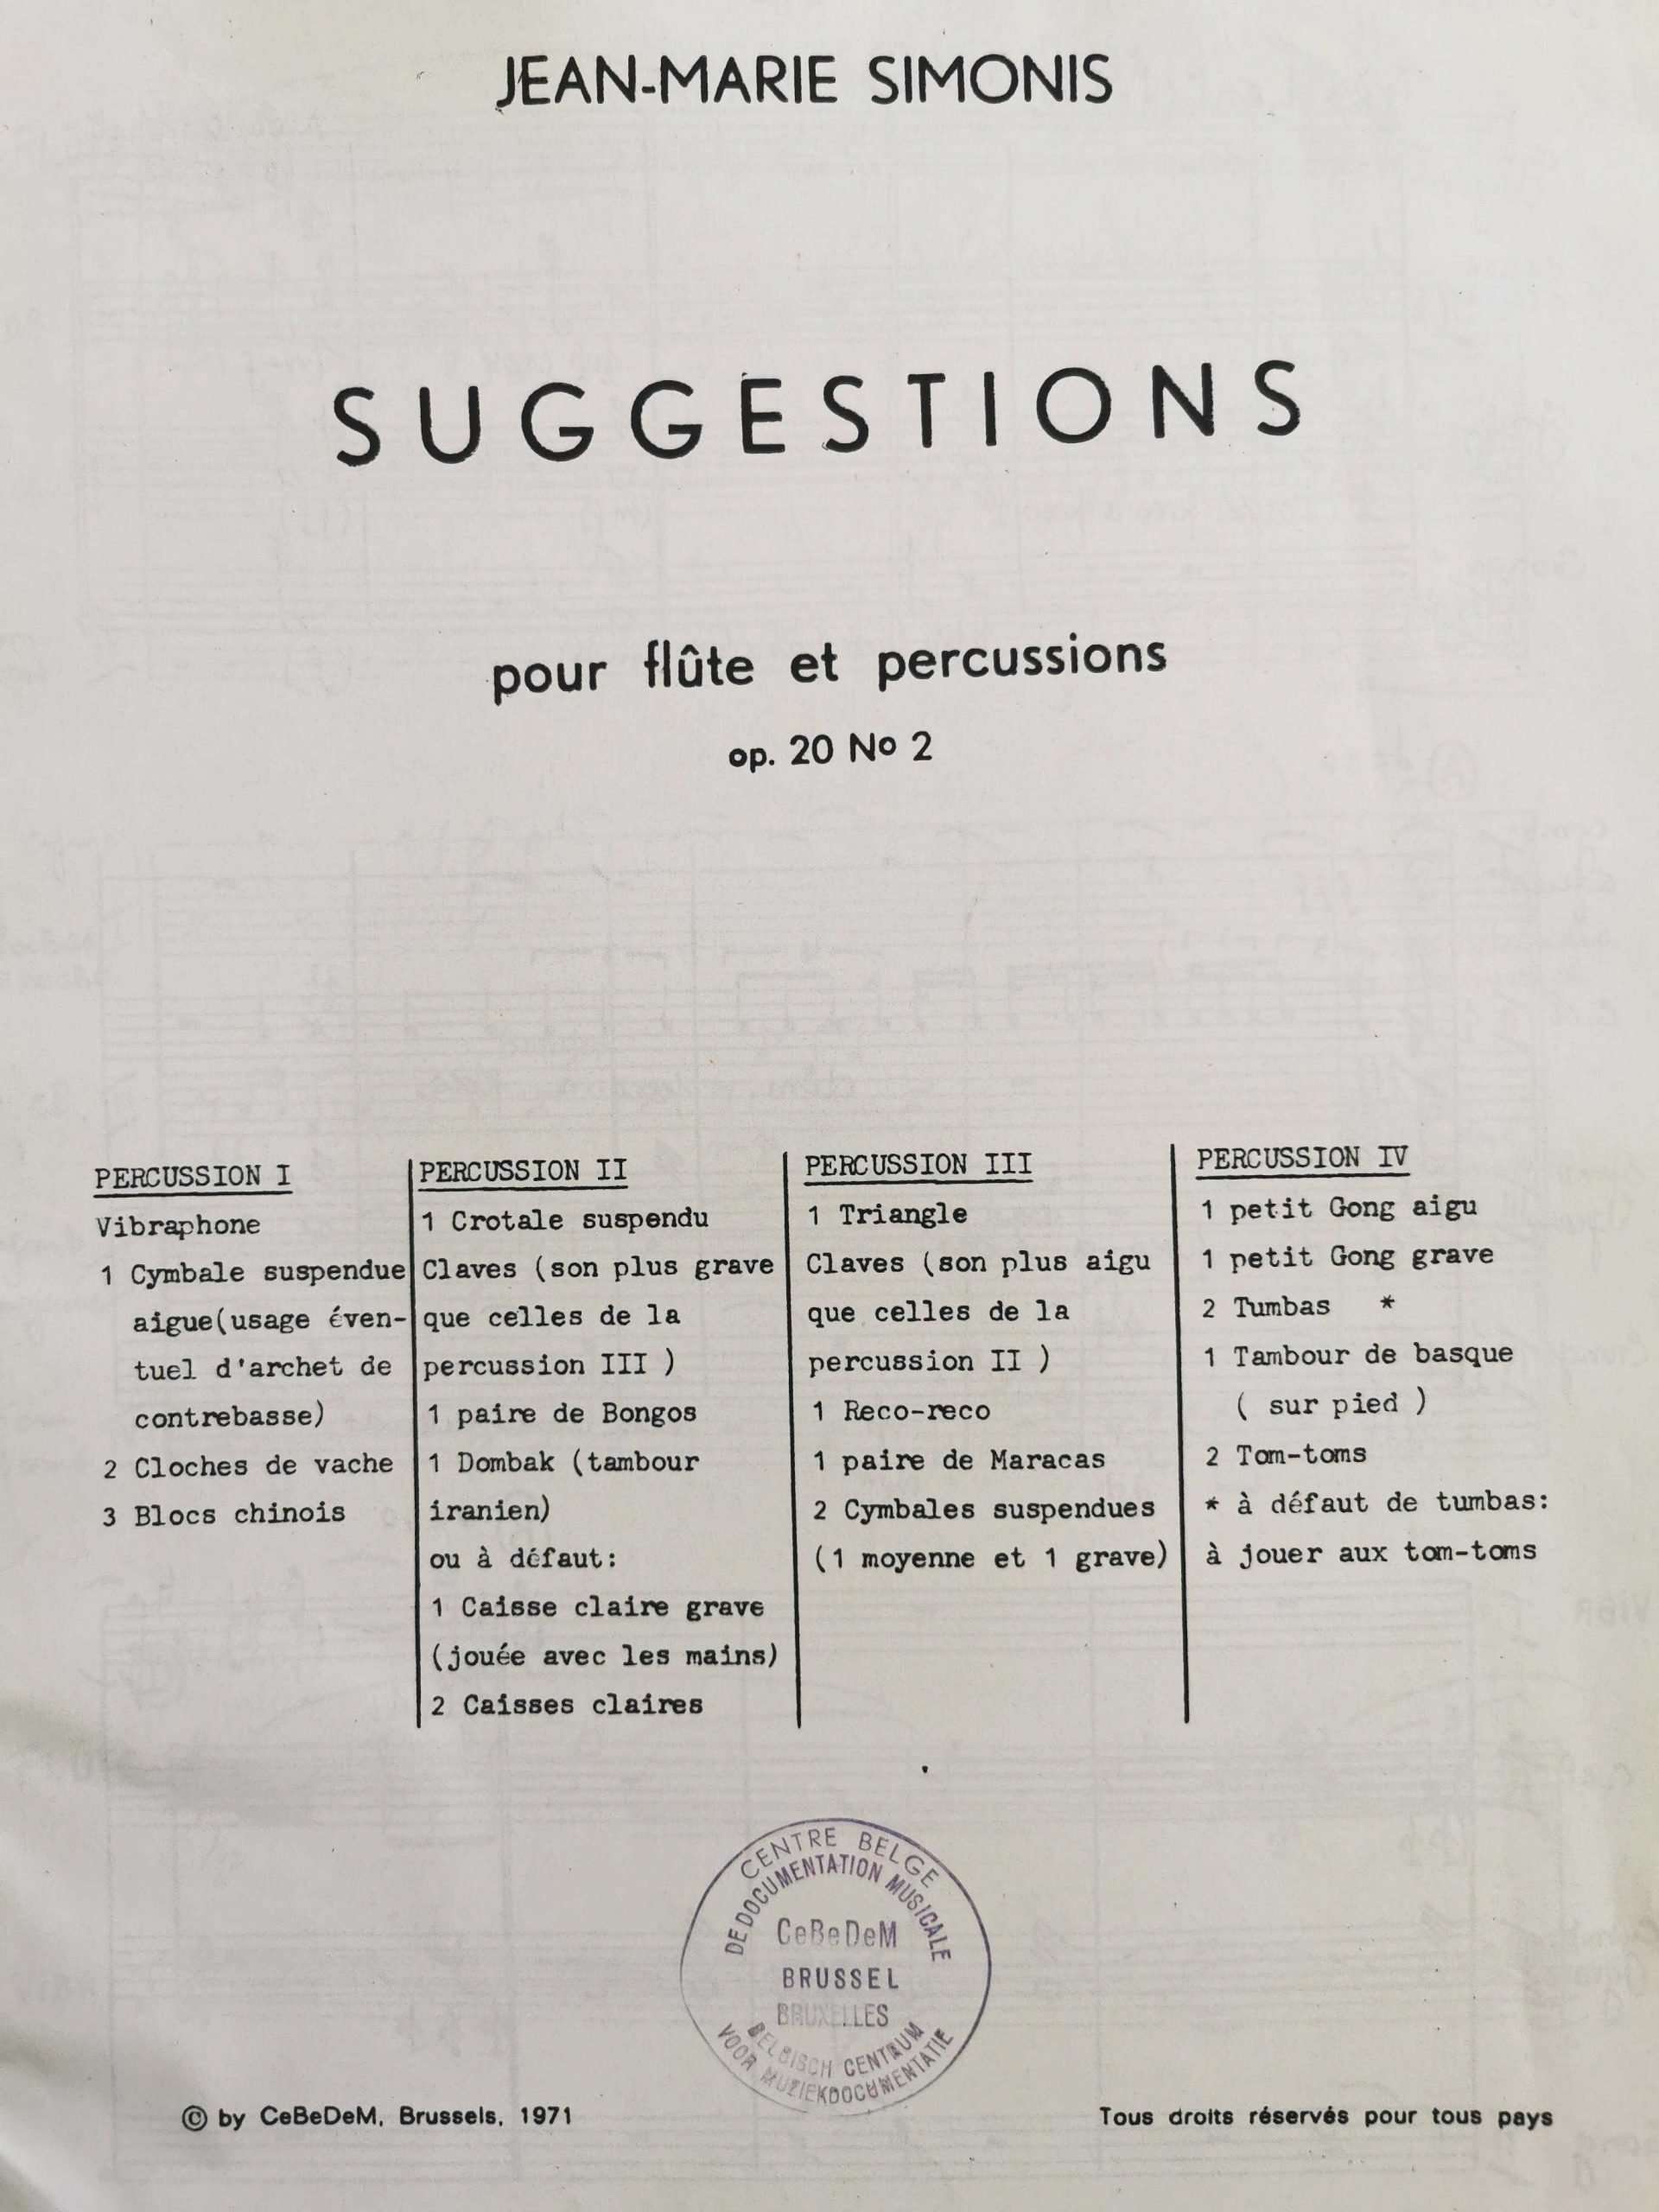 Suggestions by Jean-Marie Simonis